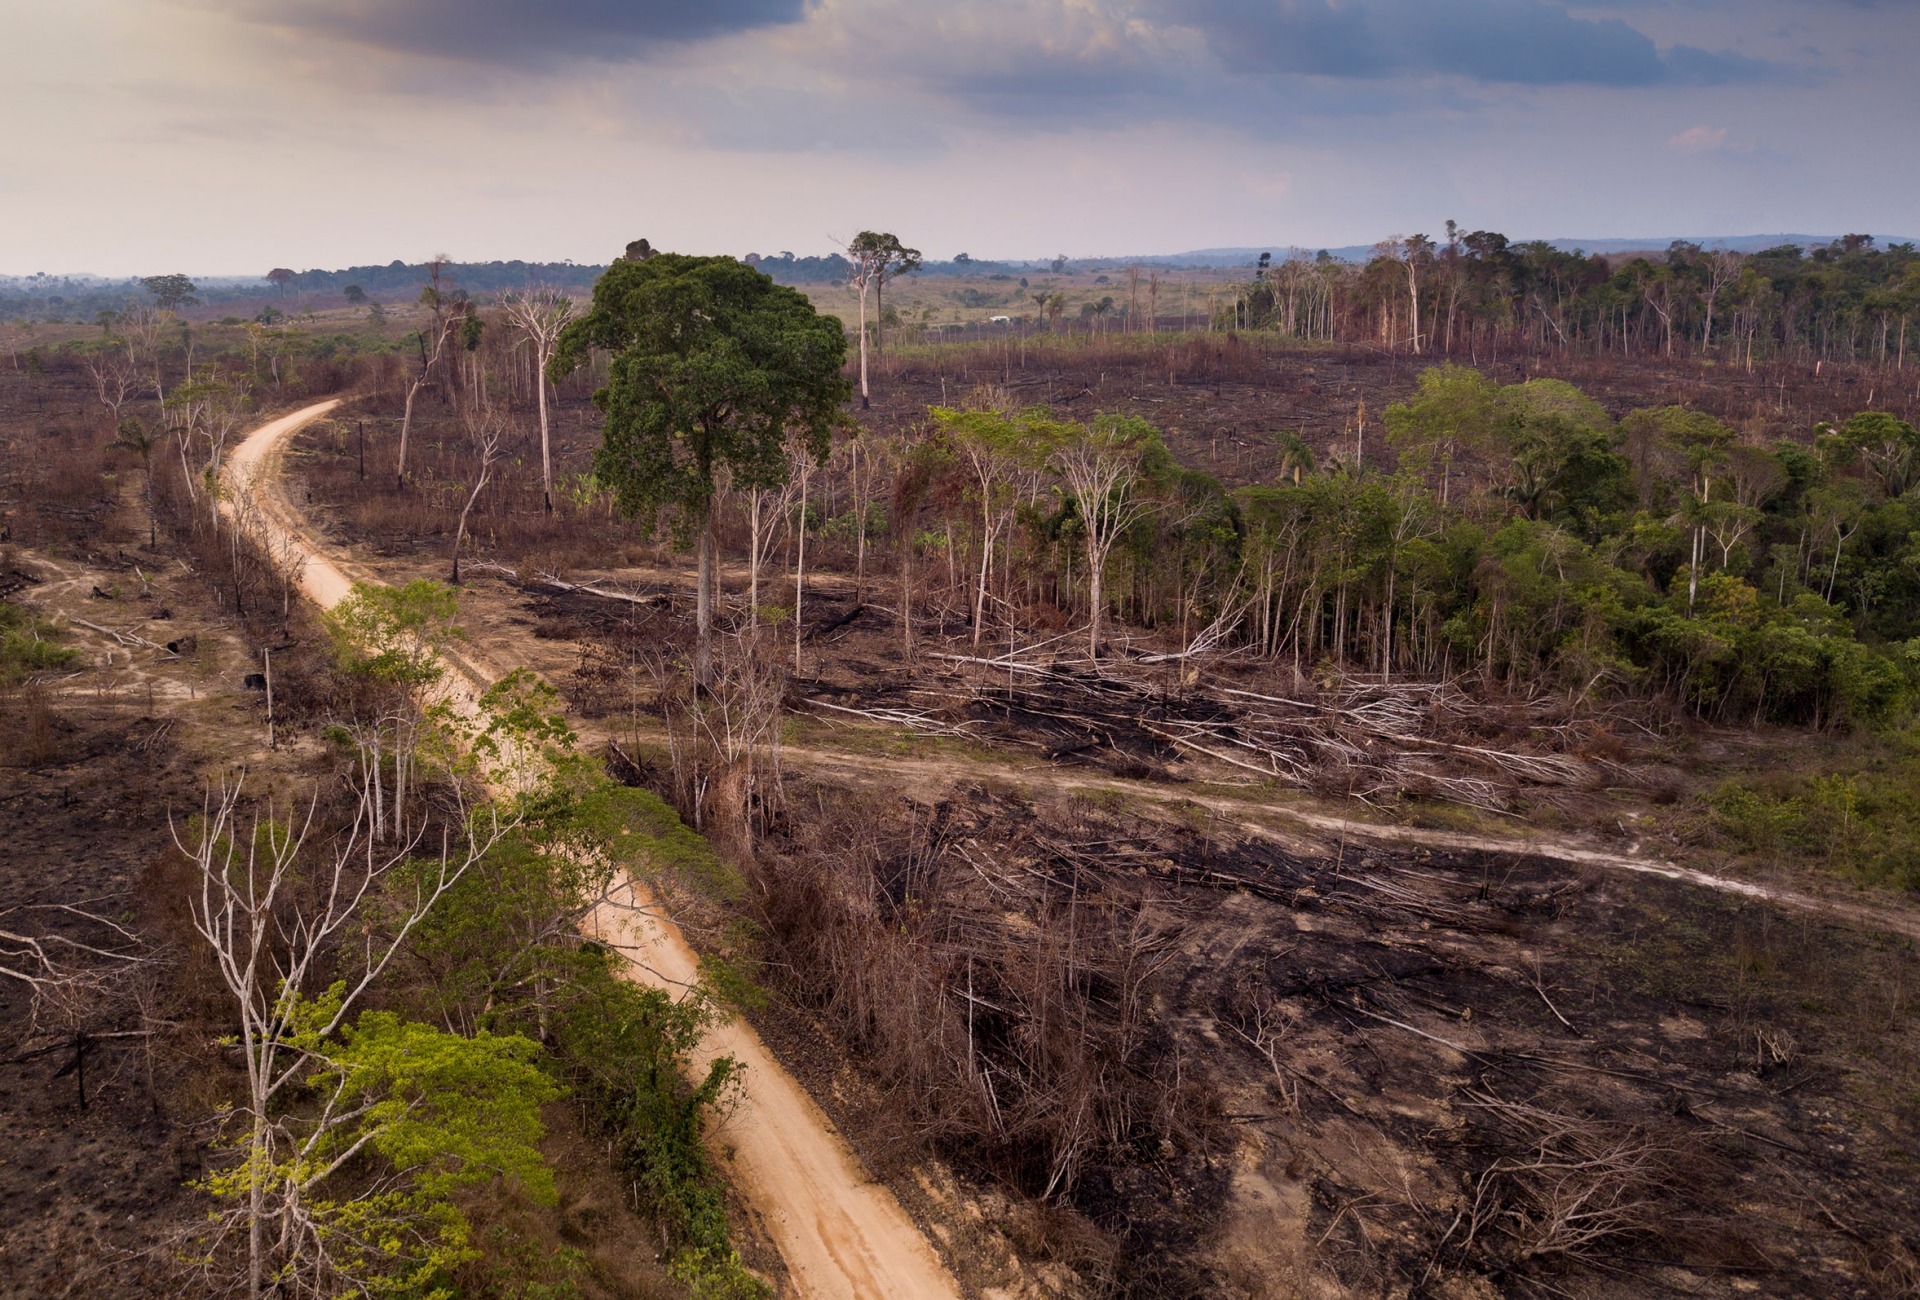 Deforestation in Brazil, by Paralaxis